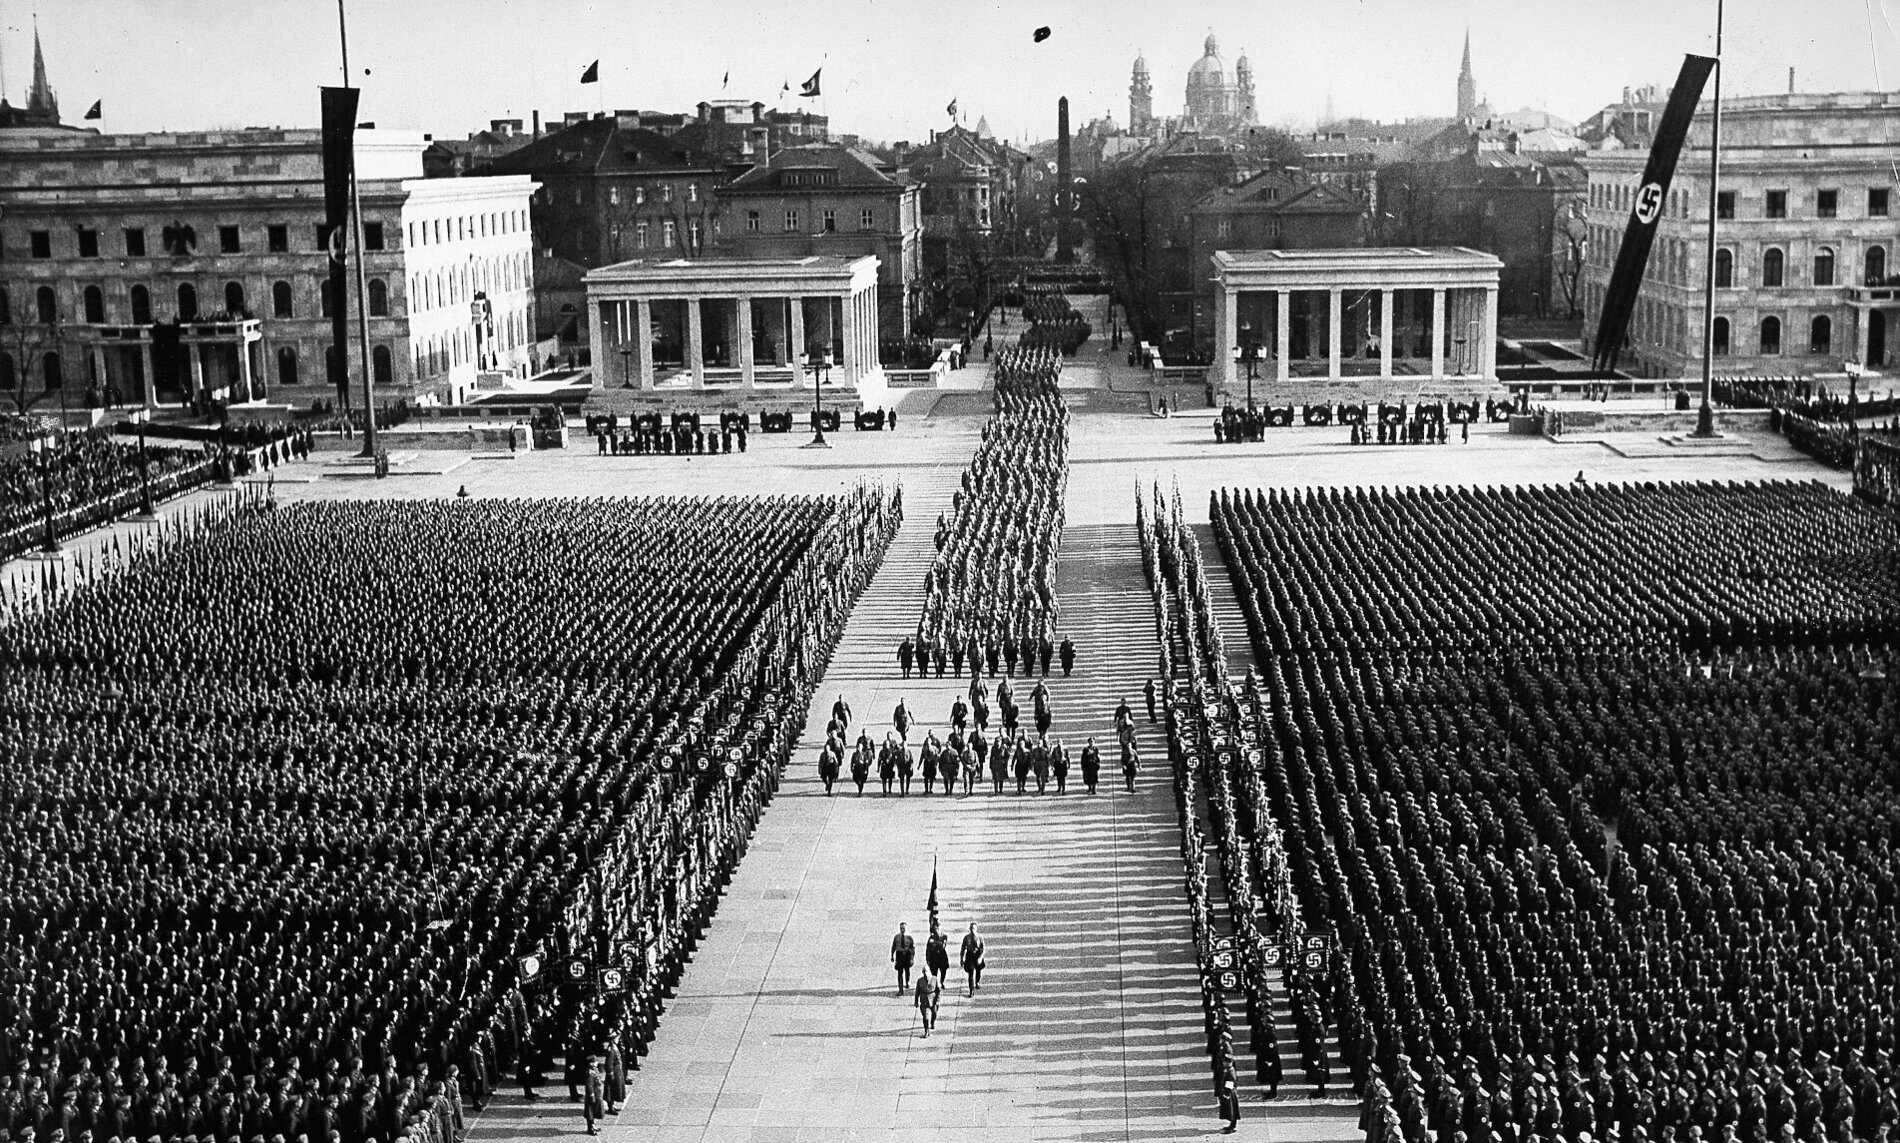 View from the Propylea onto Königsplatz adorned with swastikas. A funeral procession led by flag-bearers is making its way down the center of the square flanked on either side by hundreds of people in uniforms.